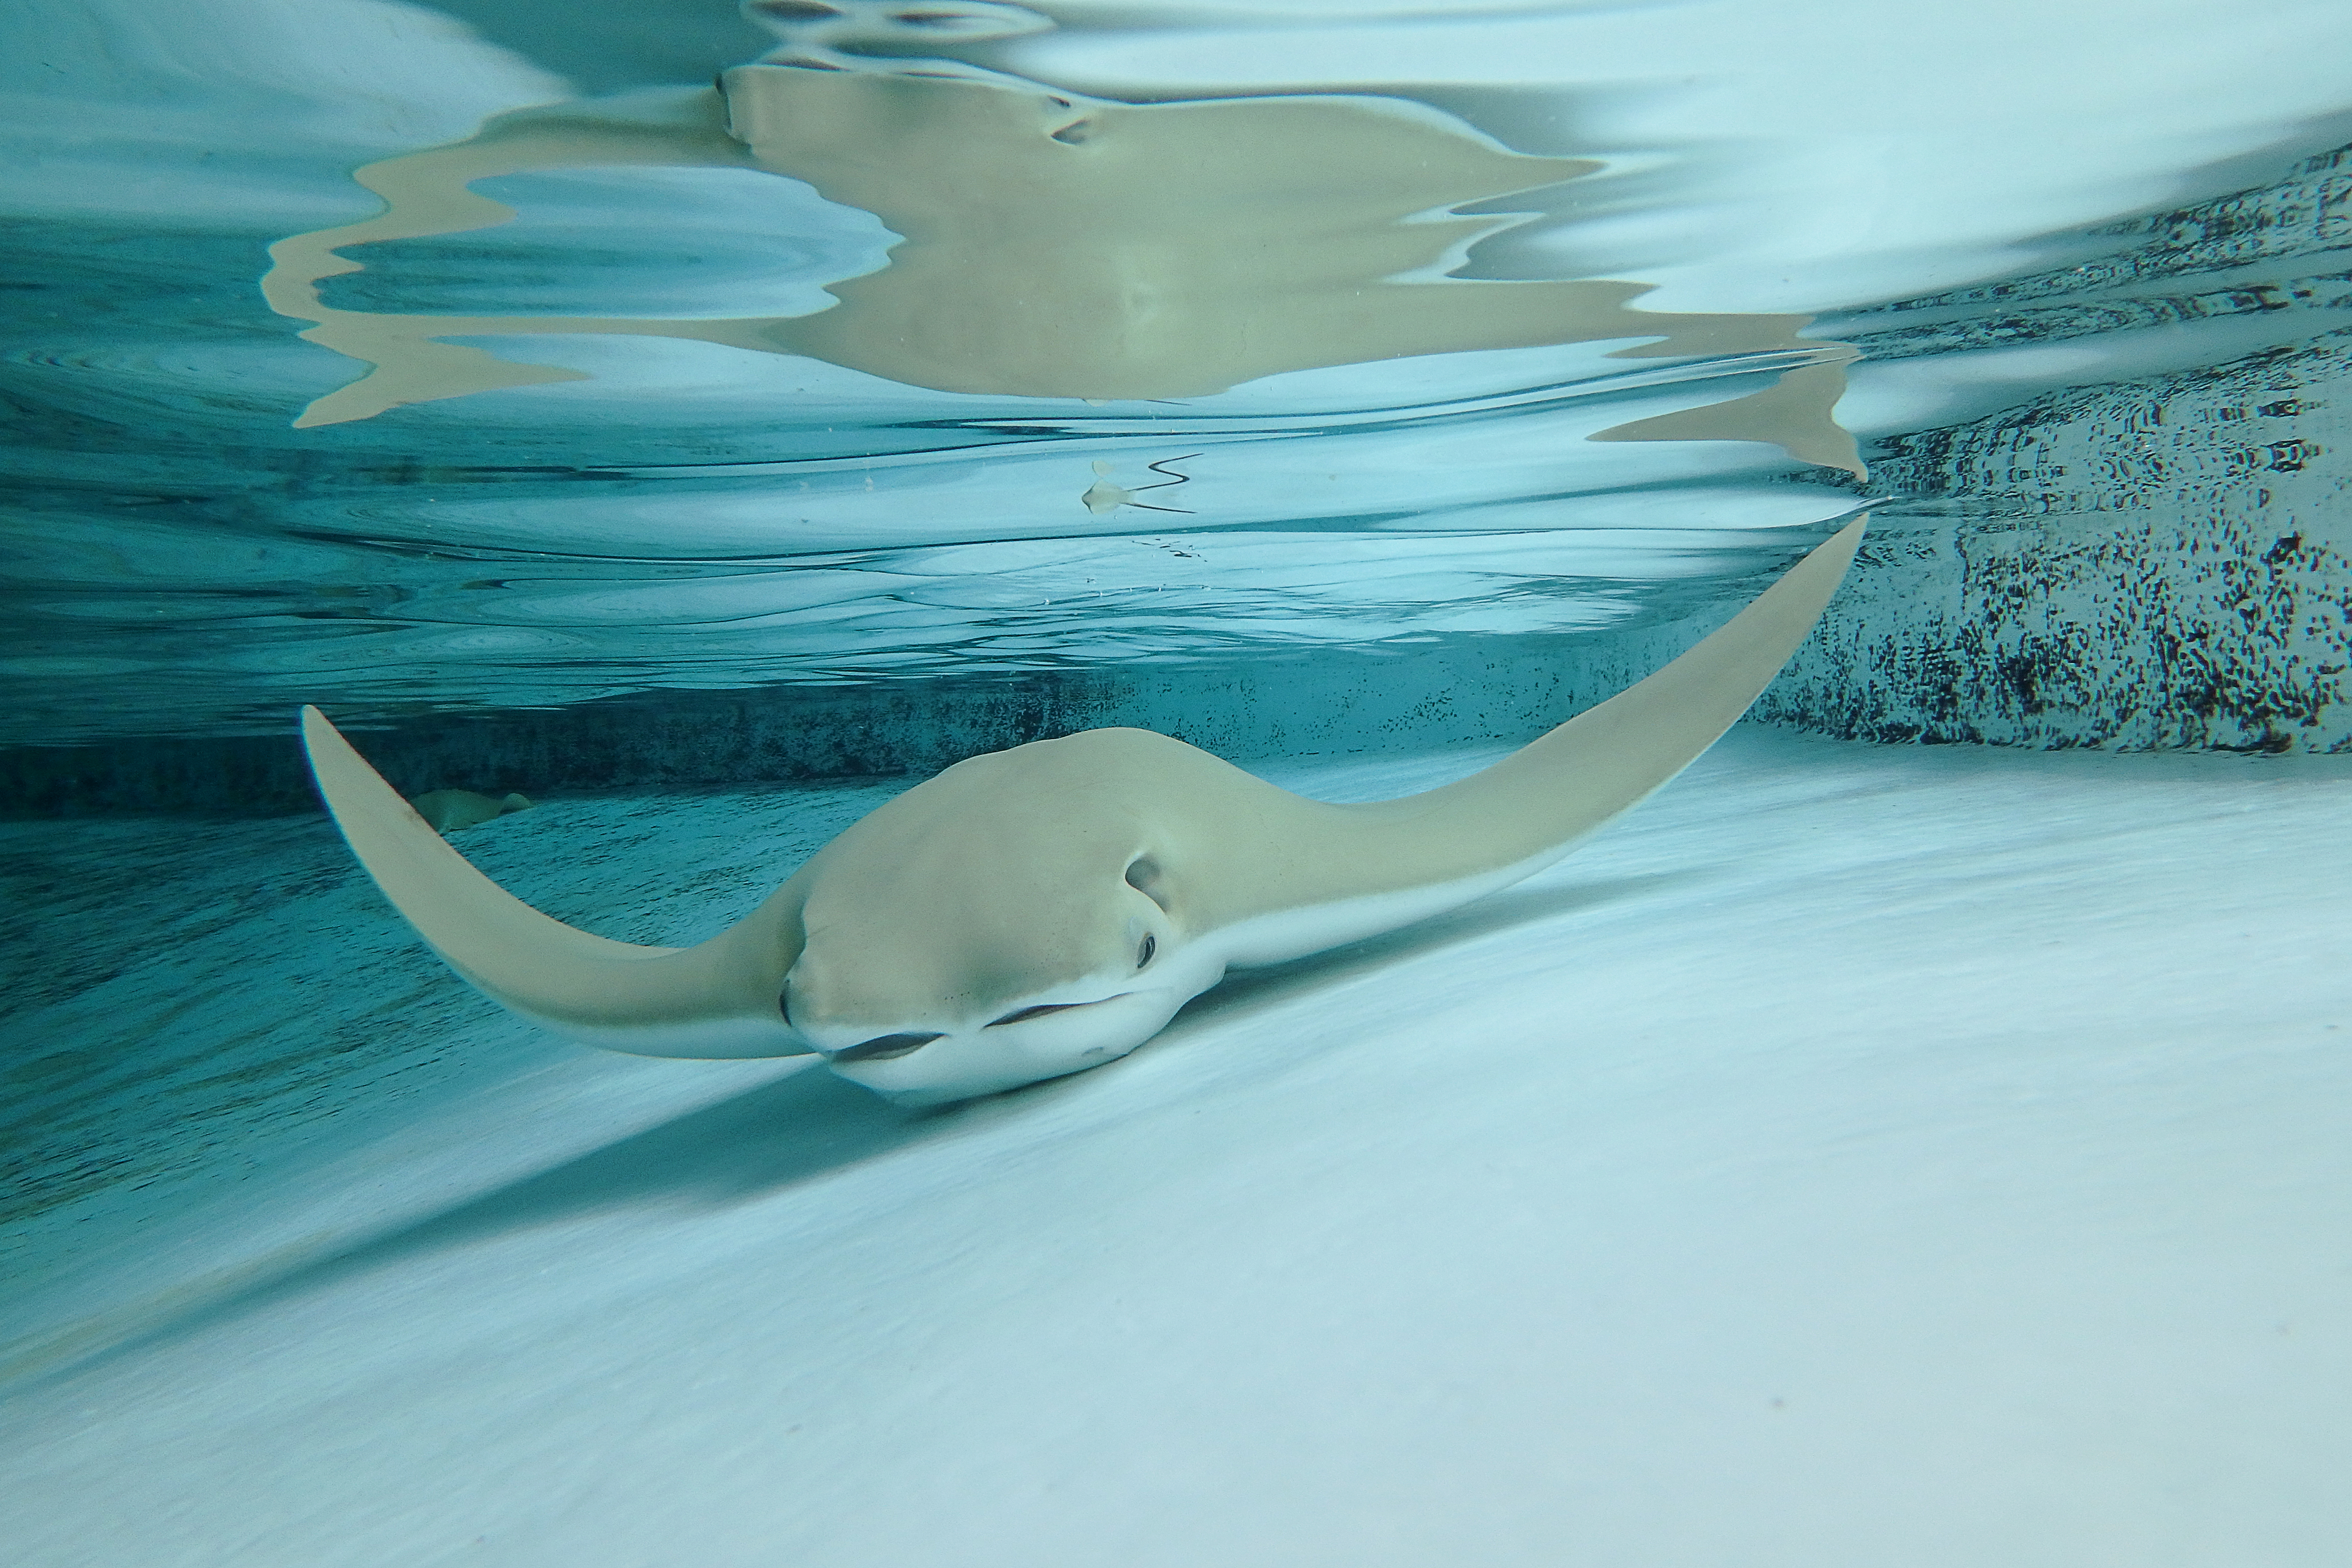 One year after 12 rays died, ZooTampa will reopen stingray touch